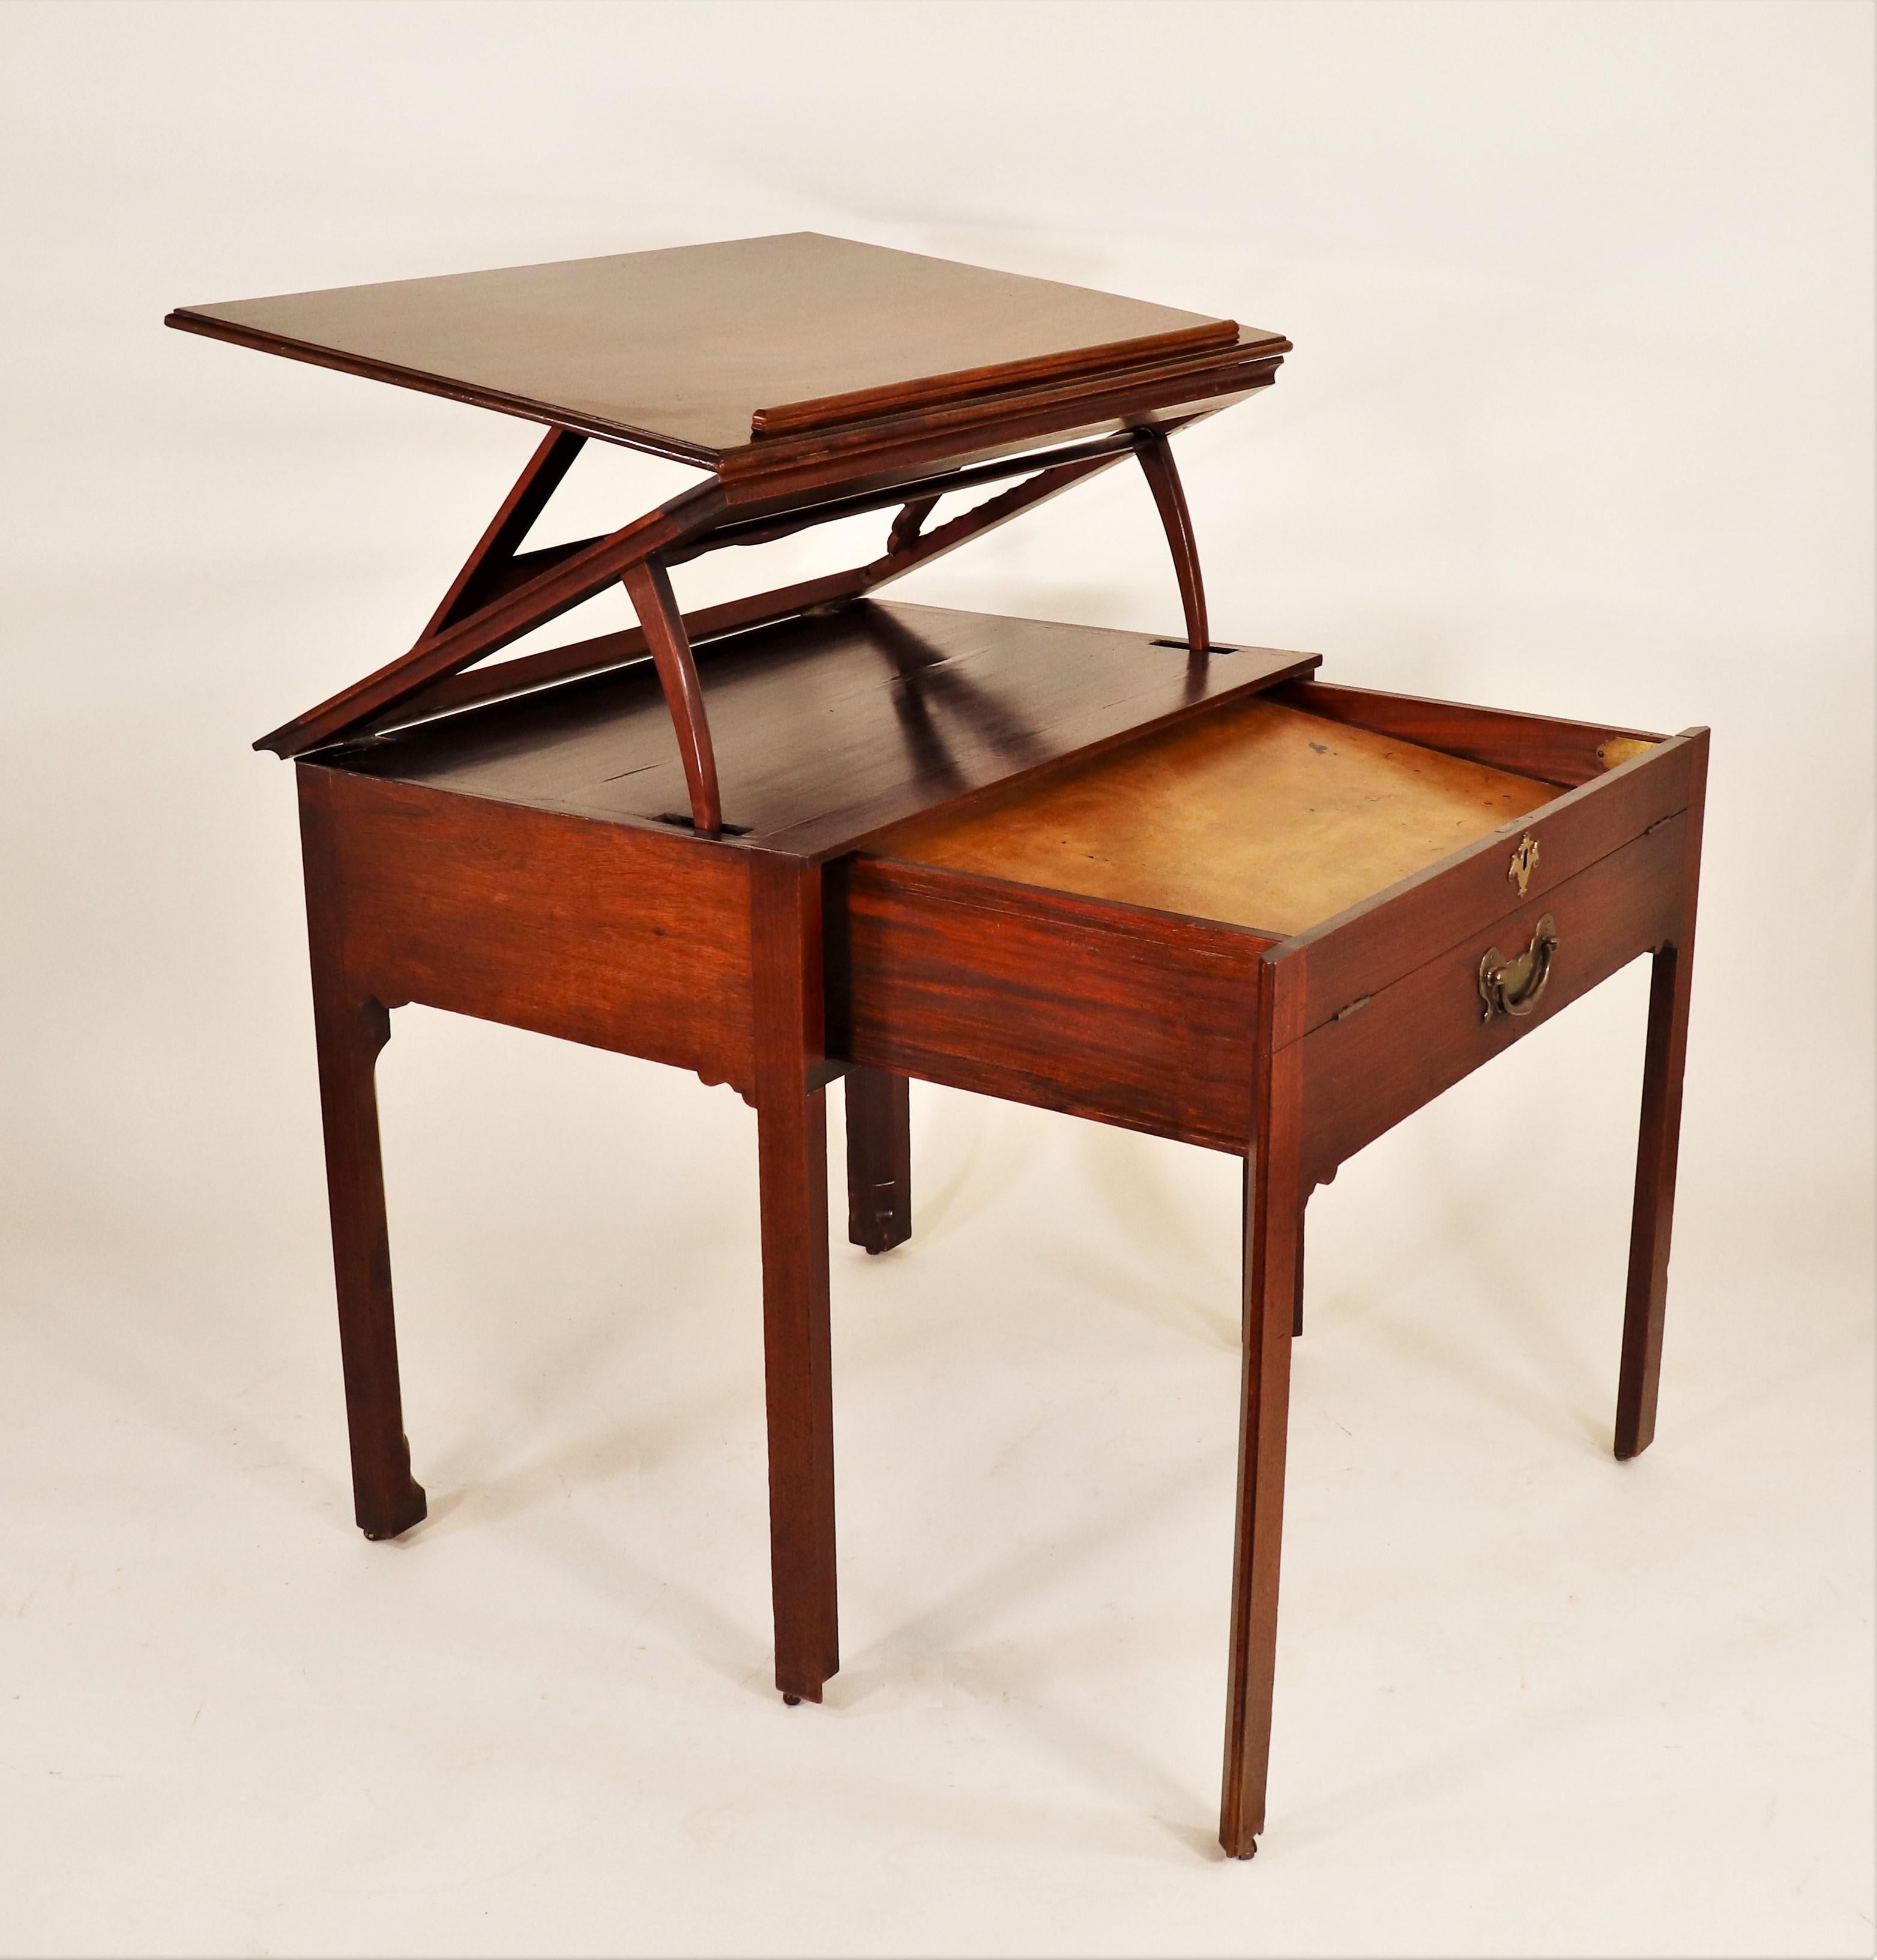 This rare and elegant Georgian Architect’s desk has a ratchet top, extending drawer front, as well as storage compartments. Architect desks, more commonly known now as drafting desks, were built for artists, architects, and engineers, serving as